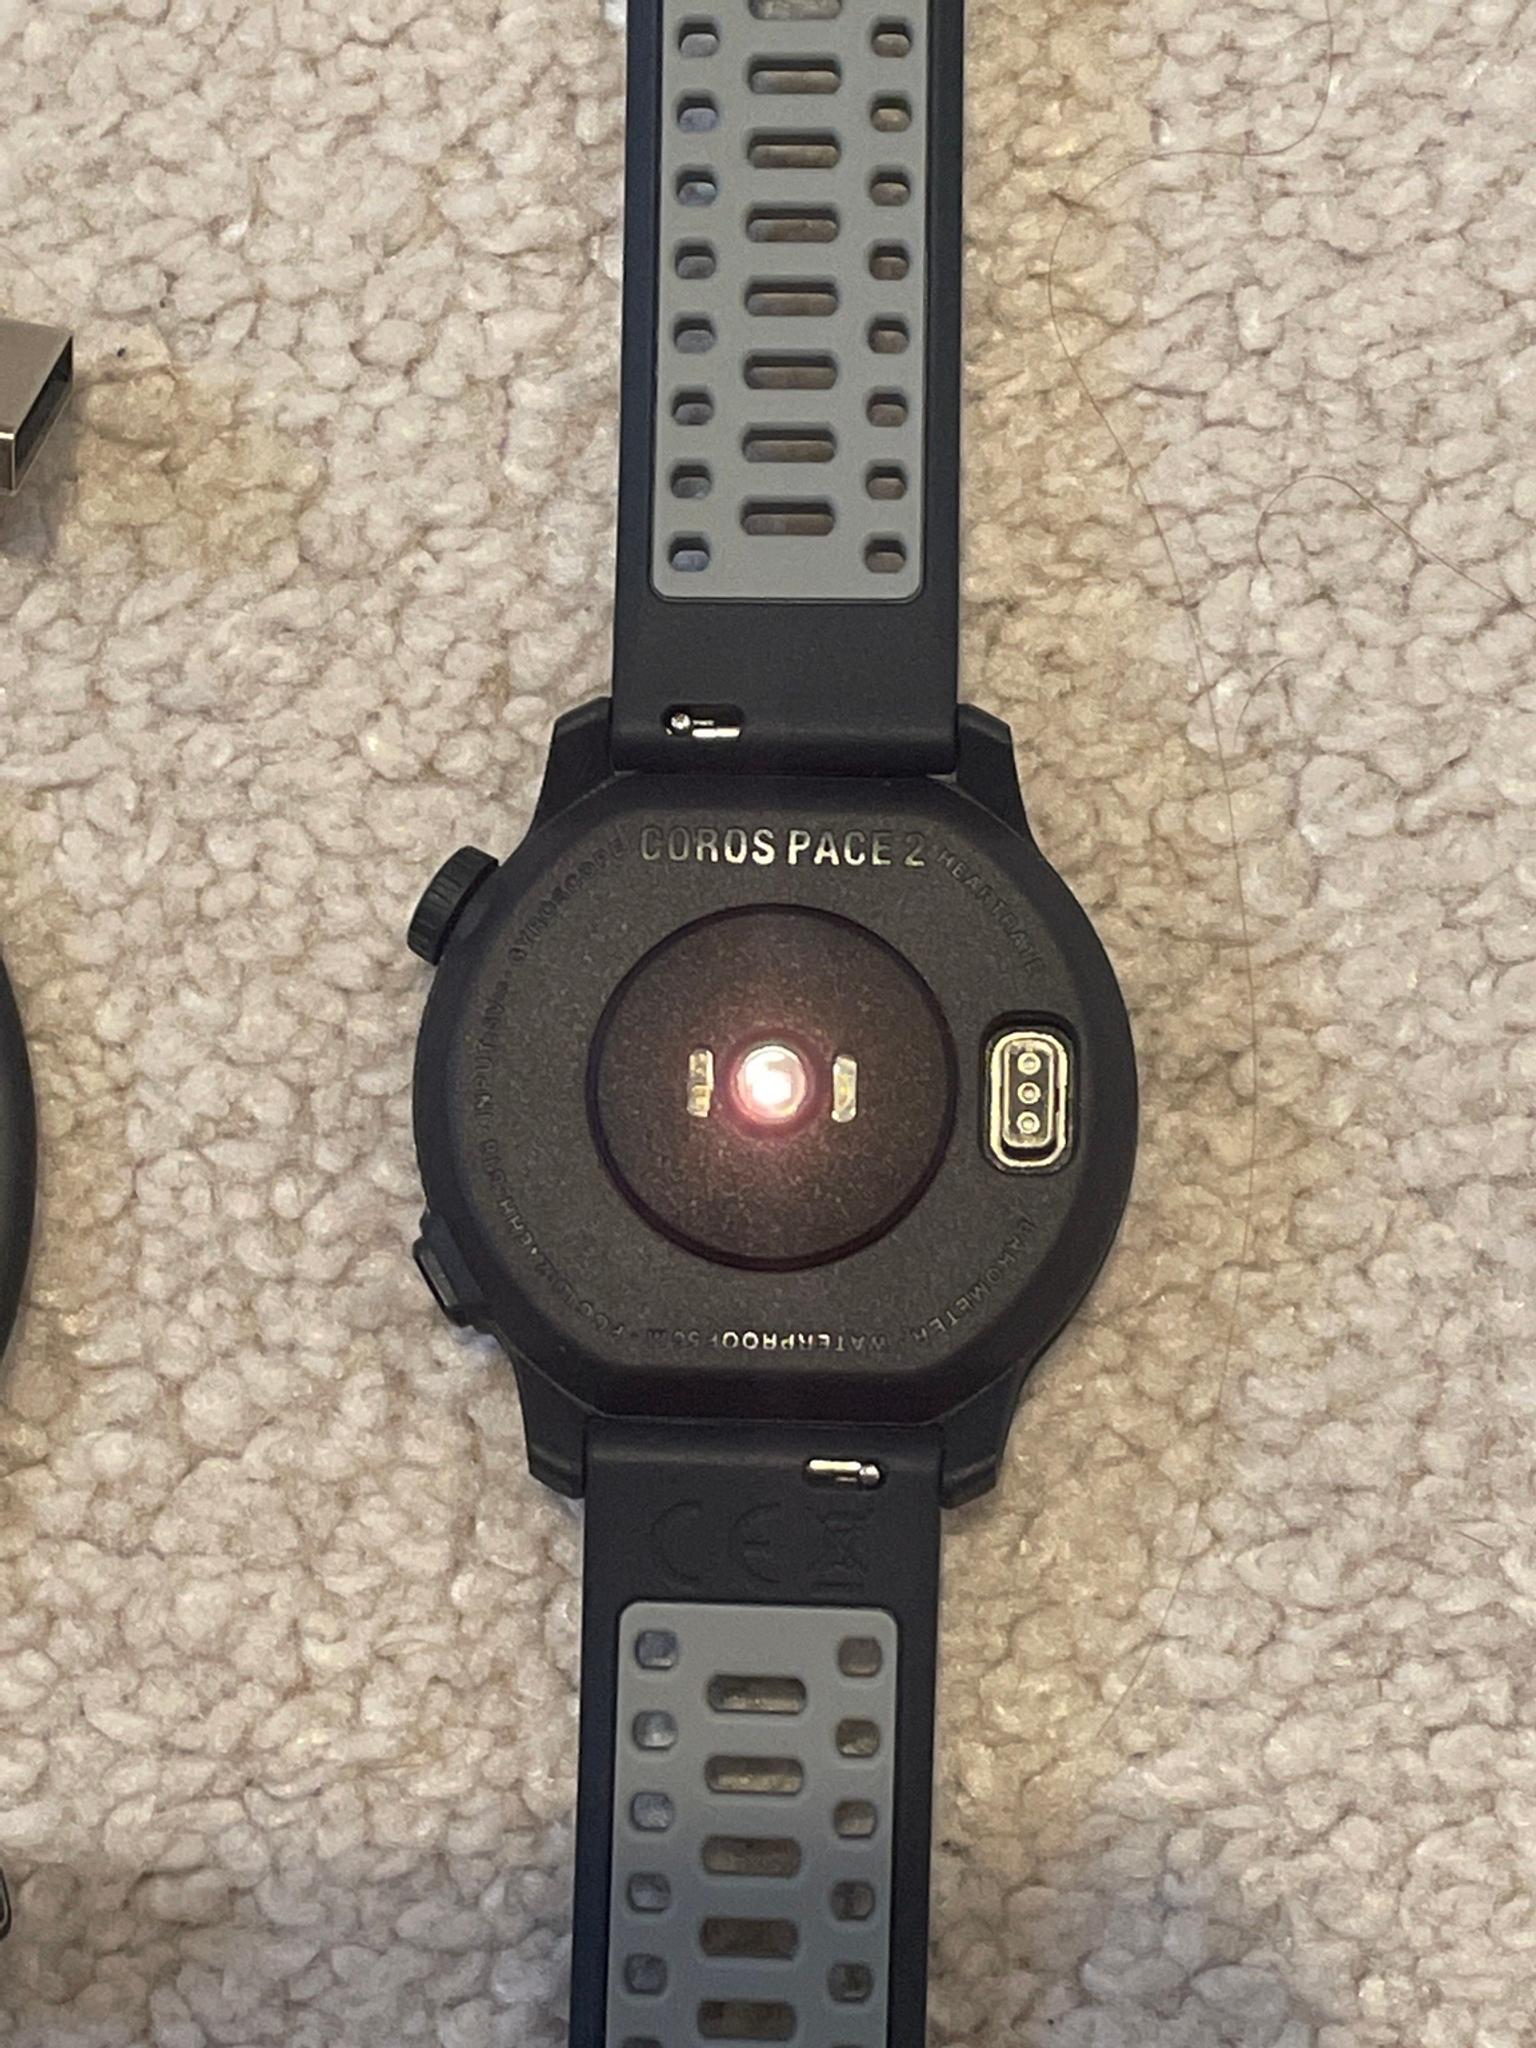 COROS Pace 2 Running Smartwatch in ME20 Malling for £160.00 for sale